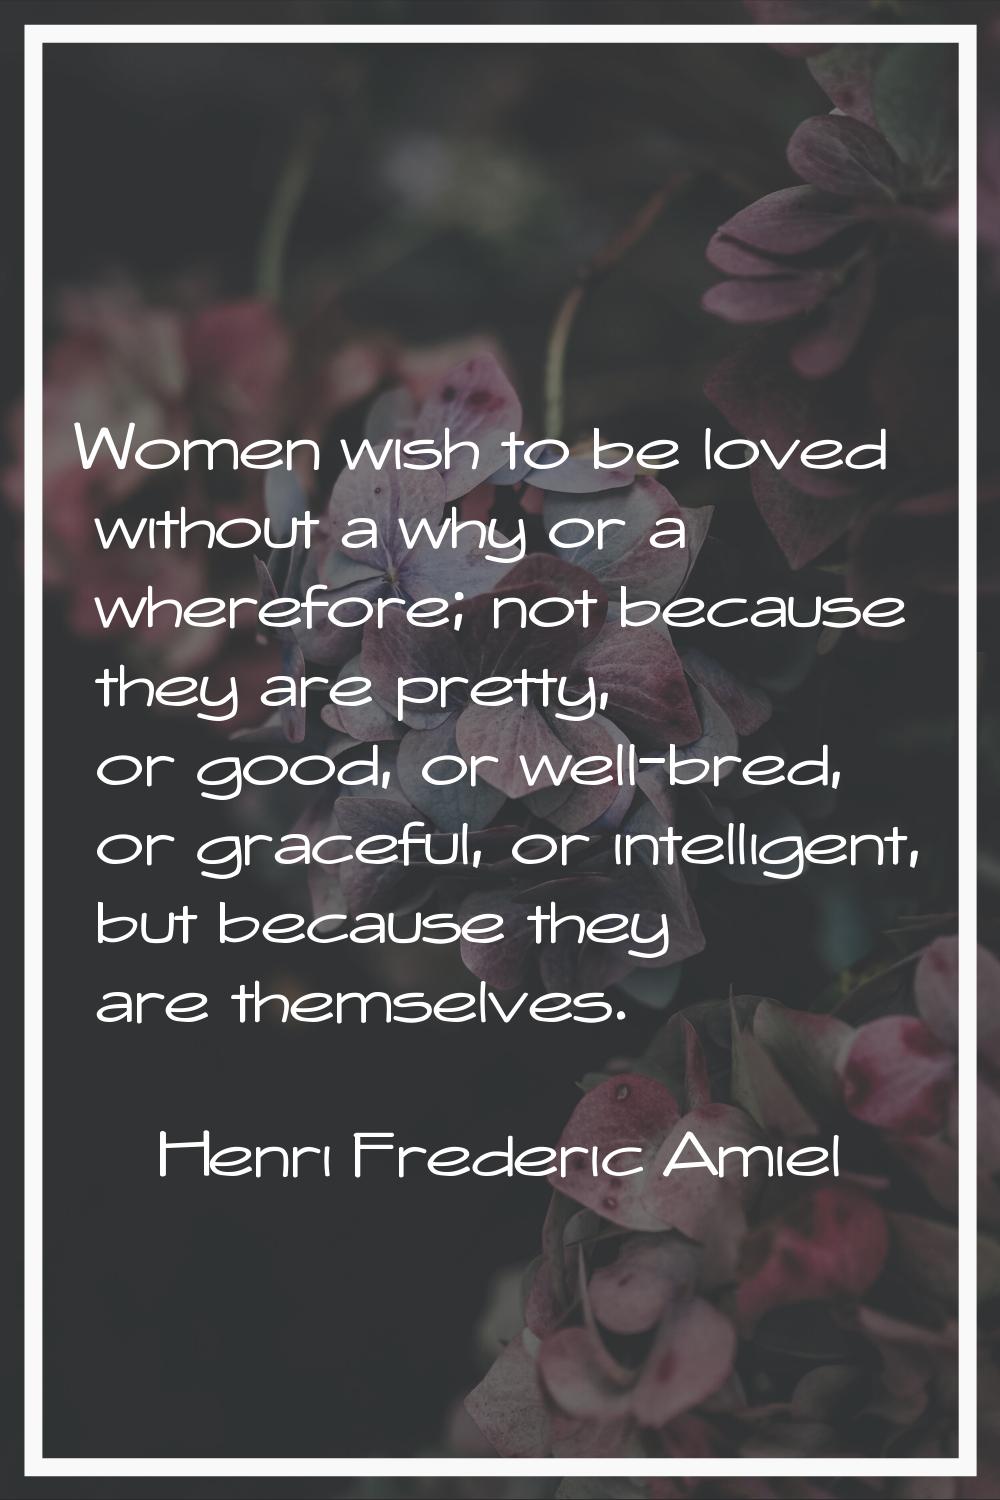 Women wish to be loved without a why or a wherefore; not because they are pretty, or good, or well-